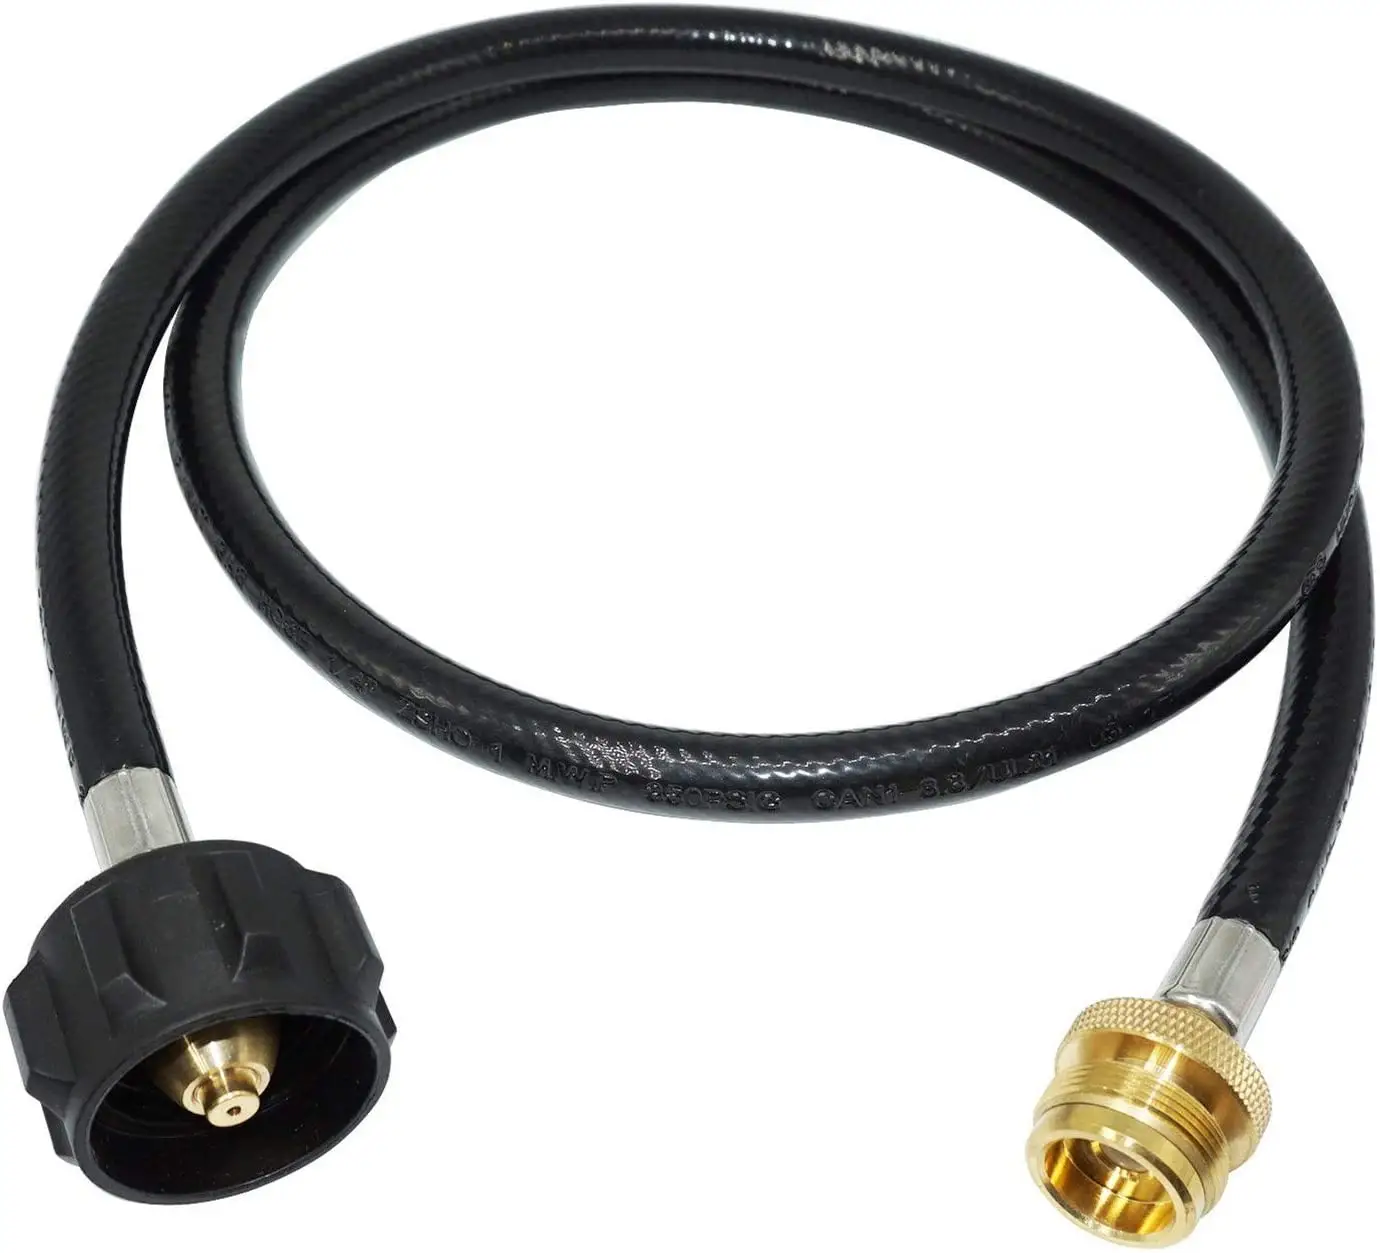 4 Feet Propane Adapter Hose 1 Ib To 20 Ib Converter Replacement For QCC1/ Type1 Tank Connects 1 LB Bulk Portable Appliance To 20